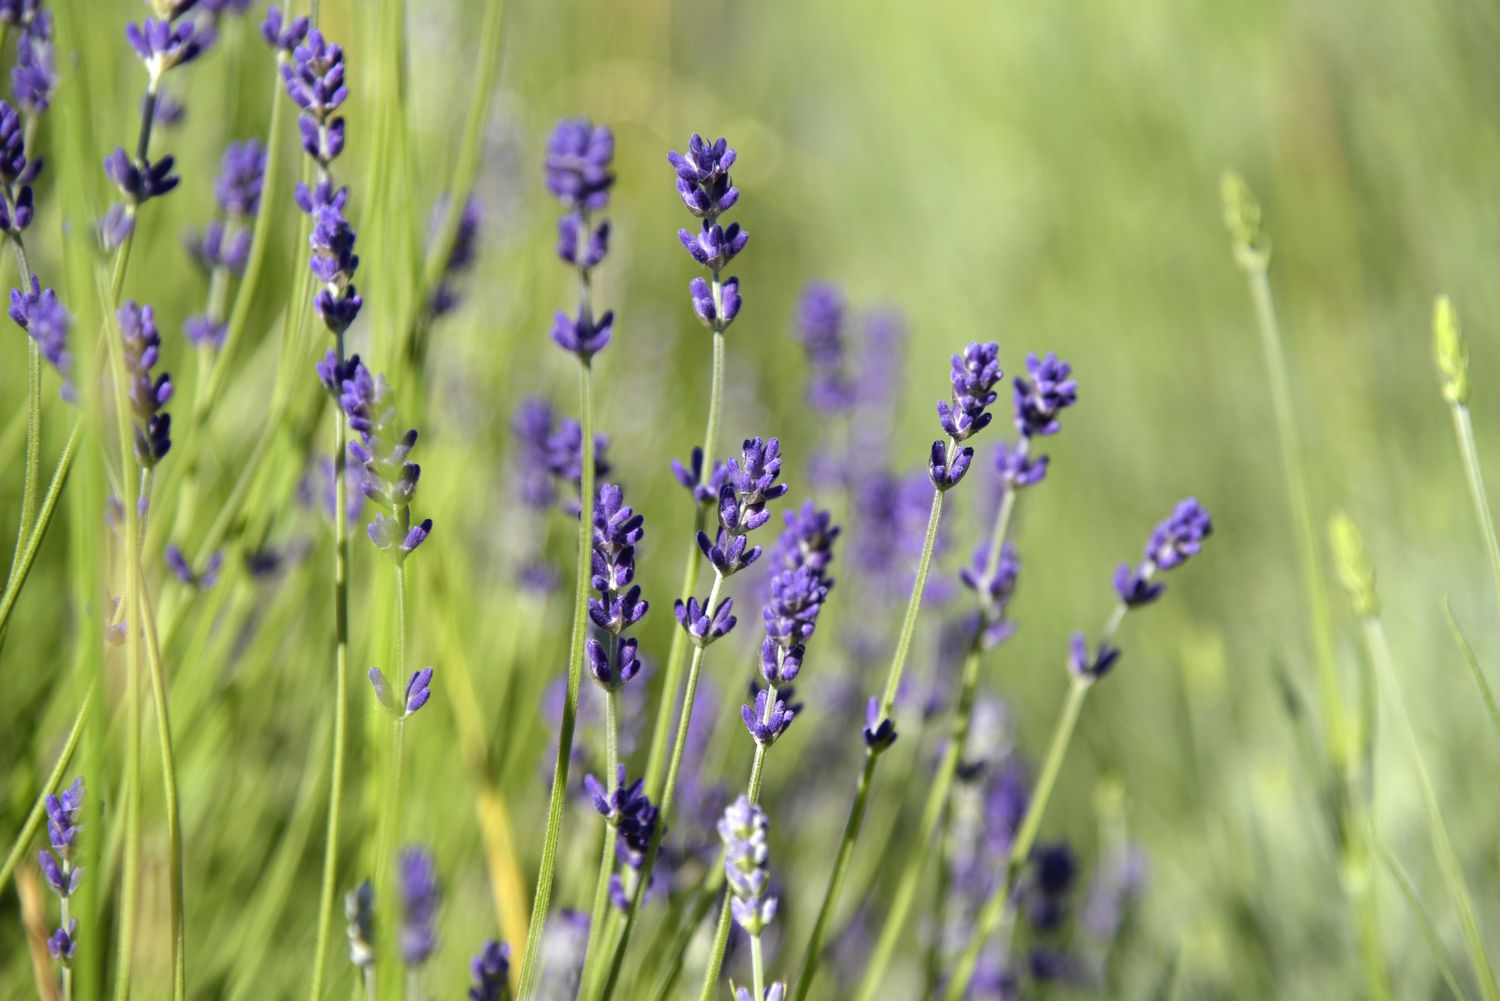 Munstead lavender with bright purple blooms on thin stems closeup